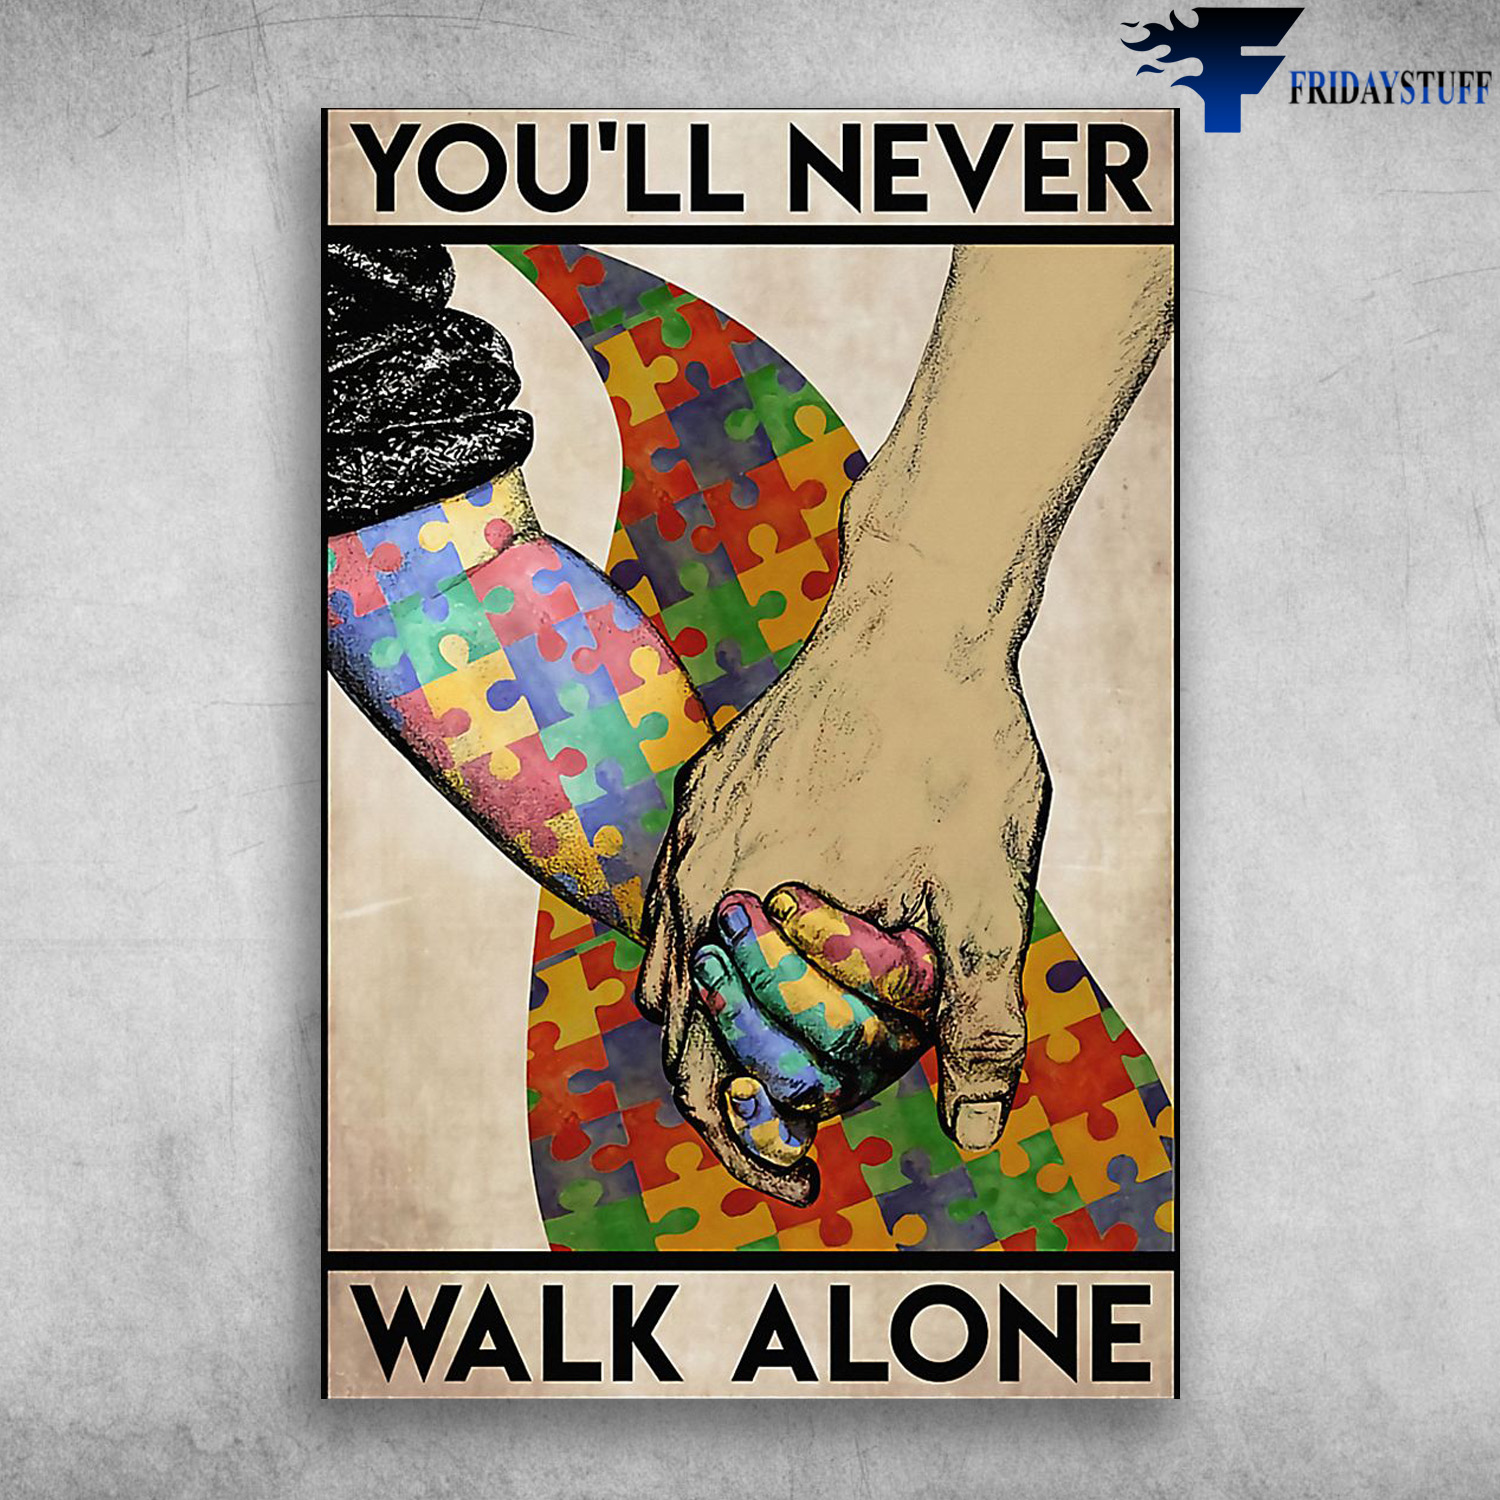 You'll Never Walk Alone Autism Awareness